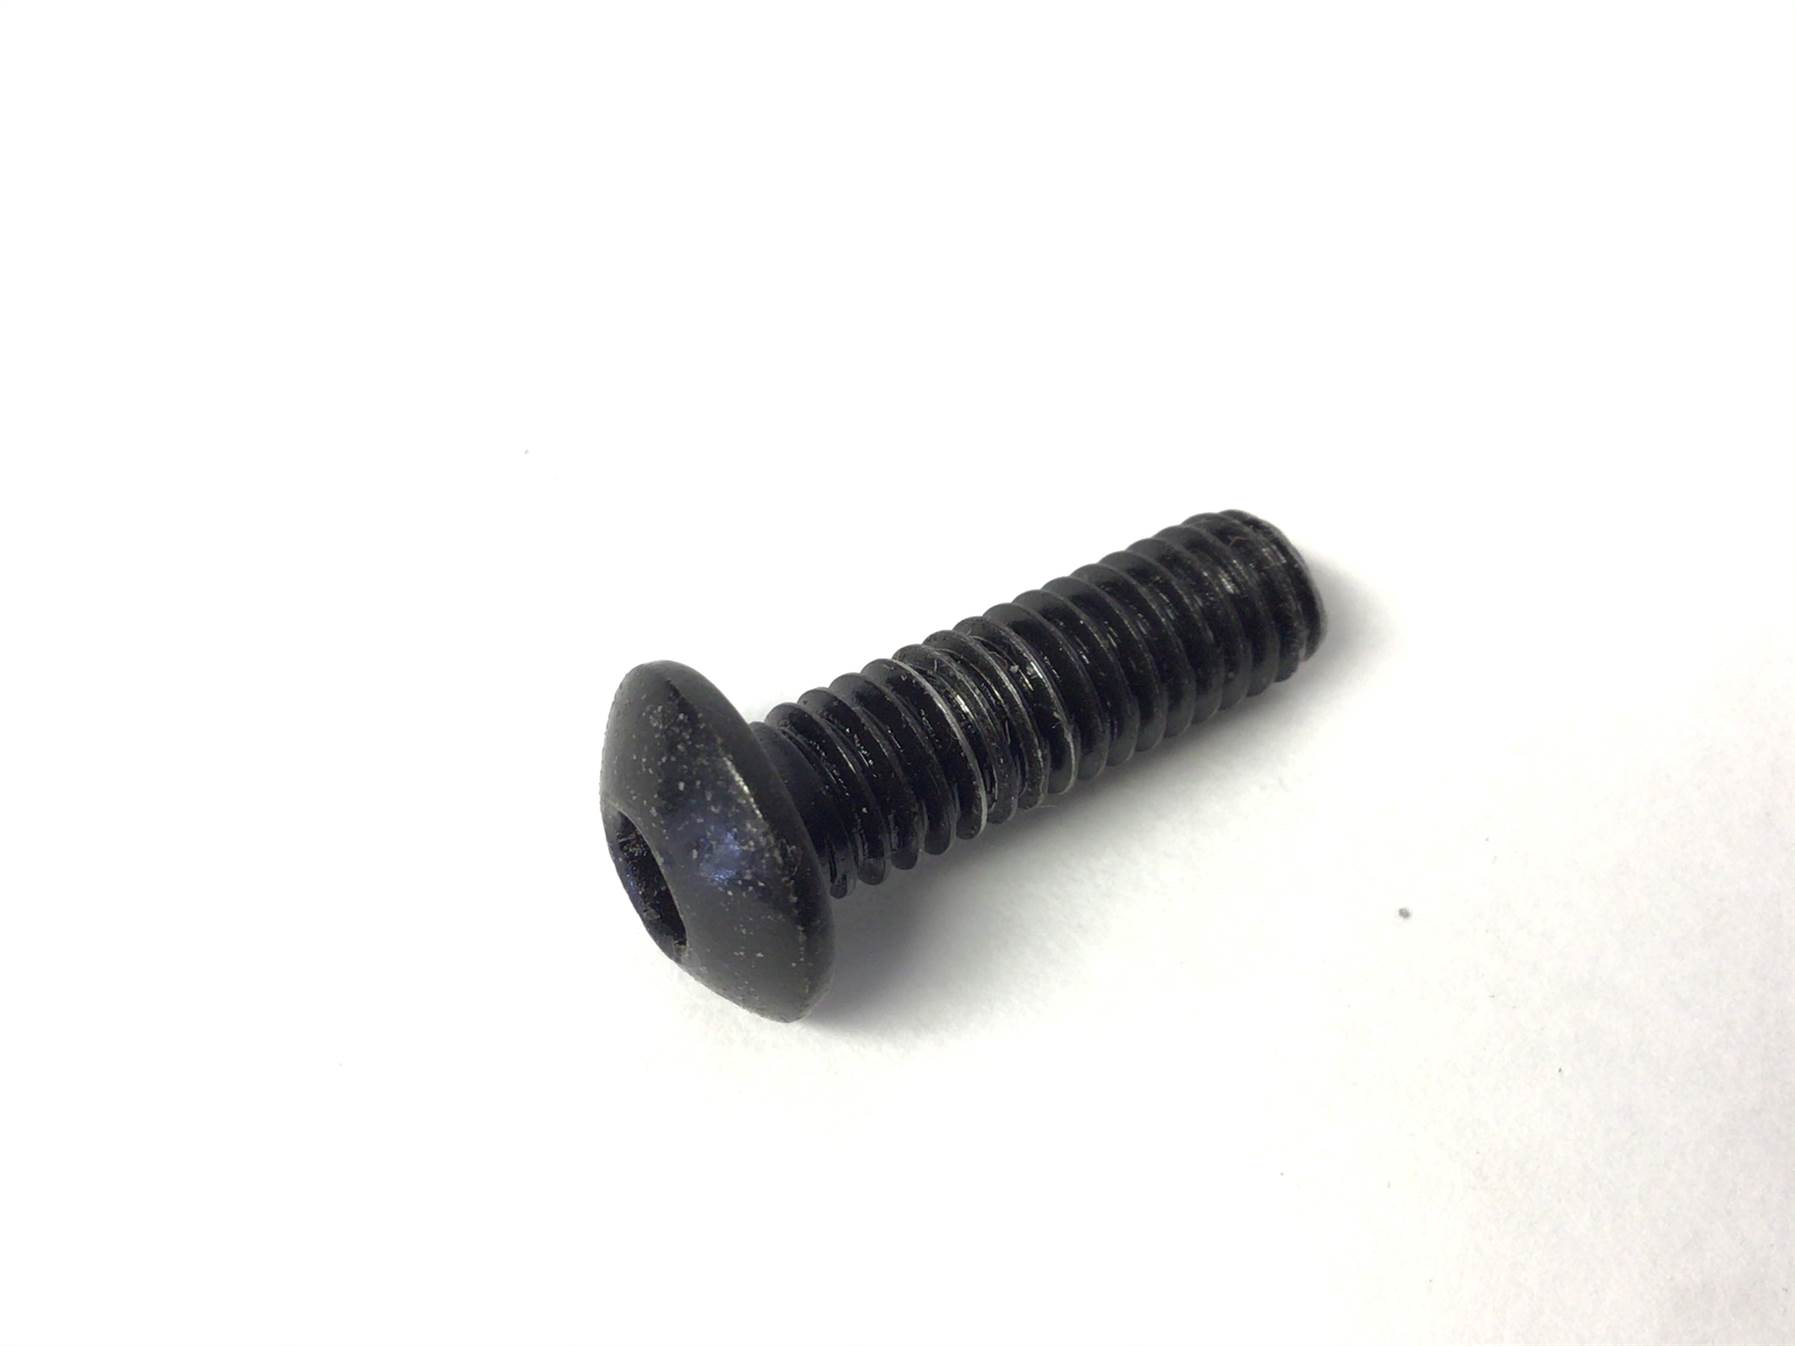 Upright Frame Button Head Screw 5/16-18X1 (Used)